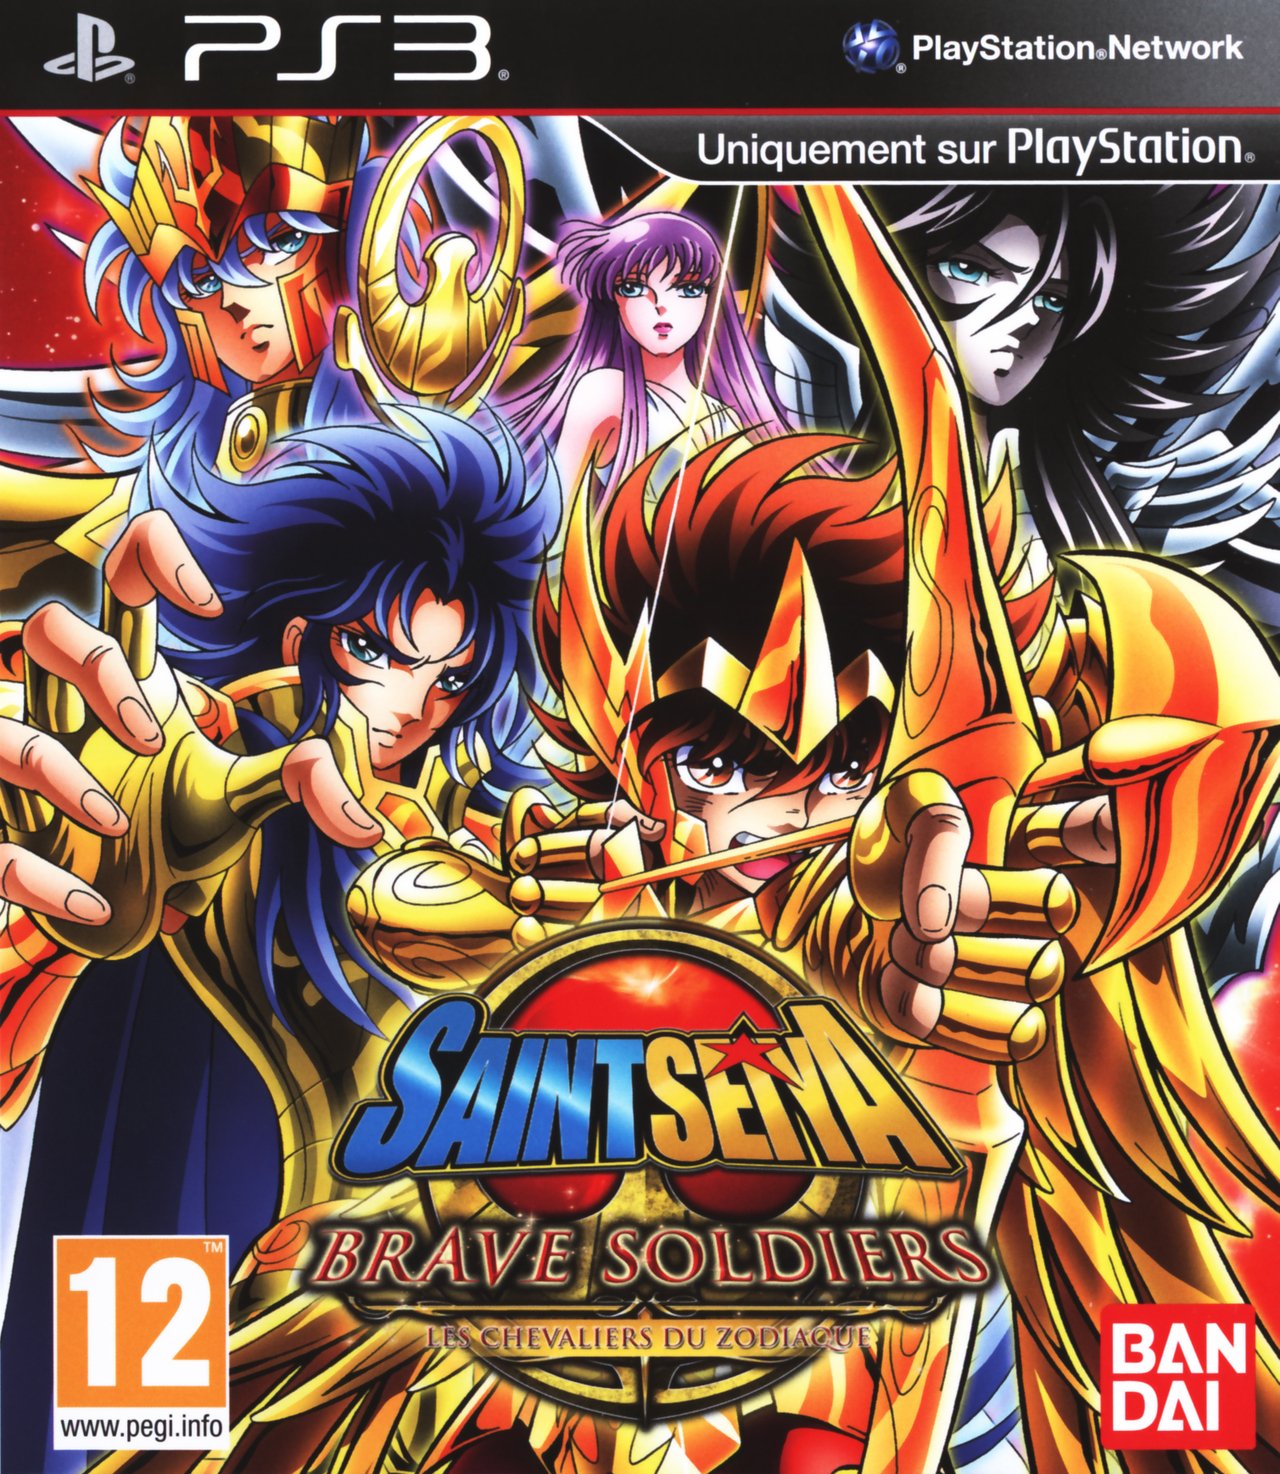 jaquette-saint-seiya-brave-soldiers-playstation-3-ps3-cover-avant-g-1384956324.jpg